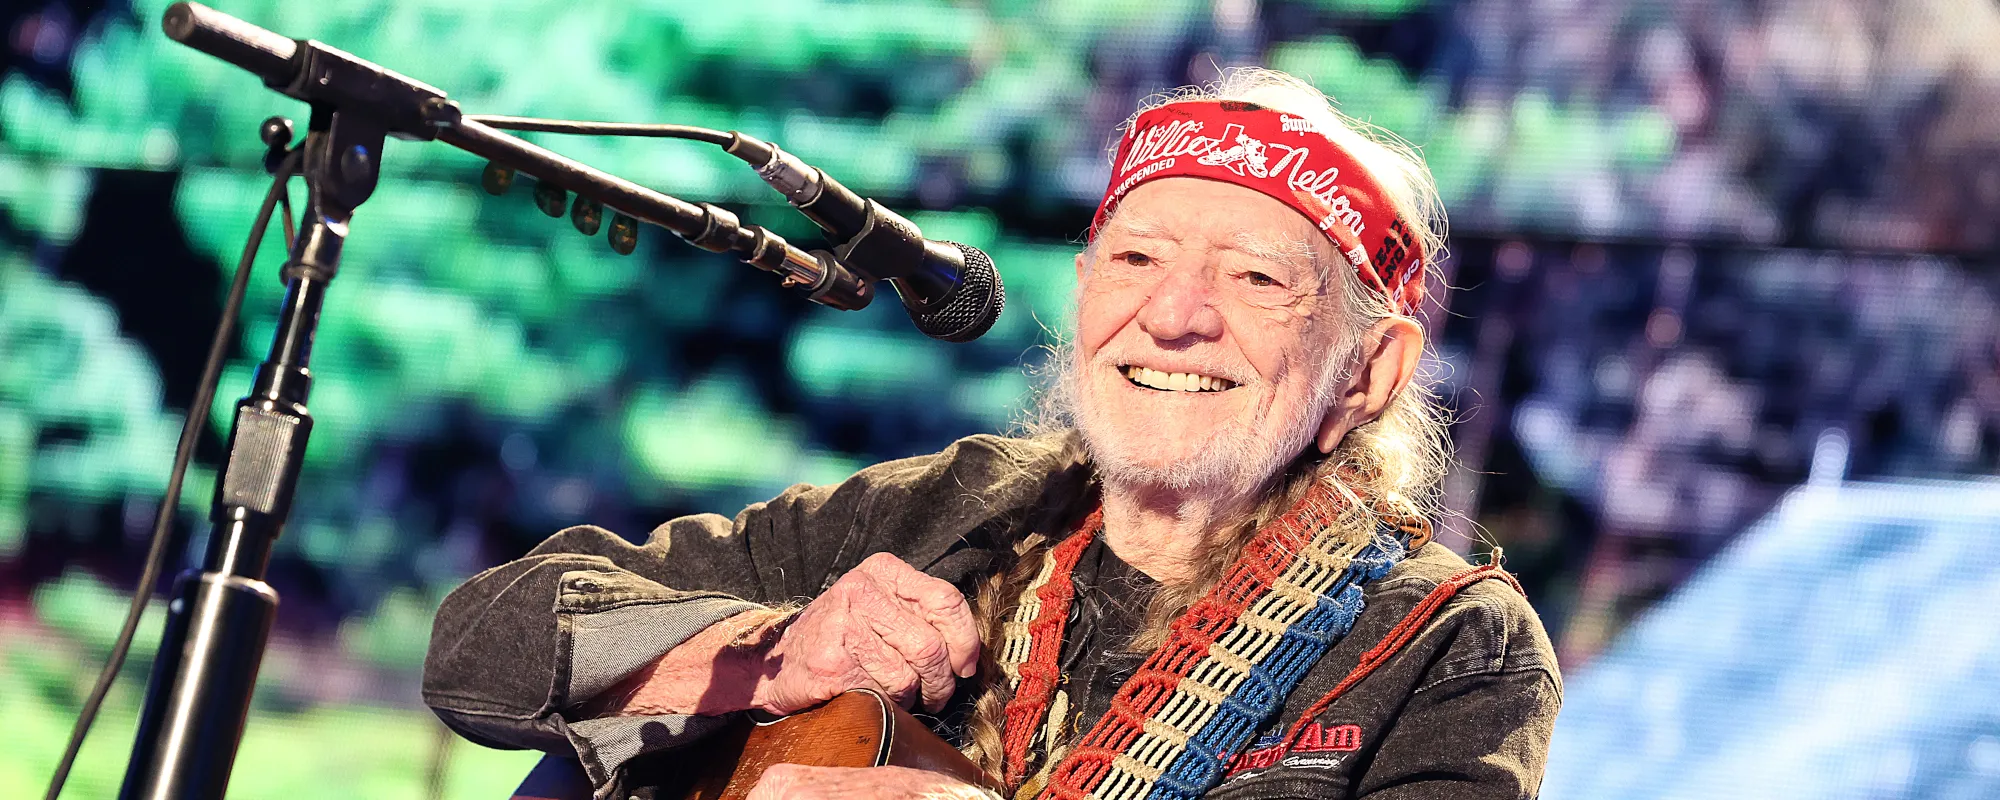 Willie Nelson’s 90th Birthday Tribute Concert Coming to Cinemas in June